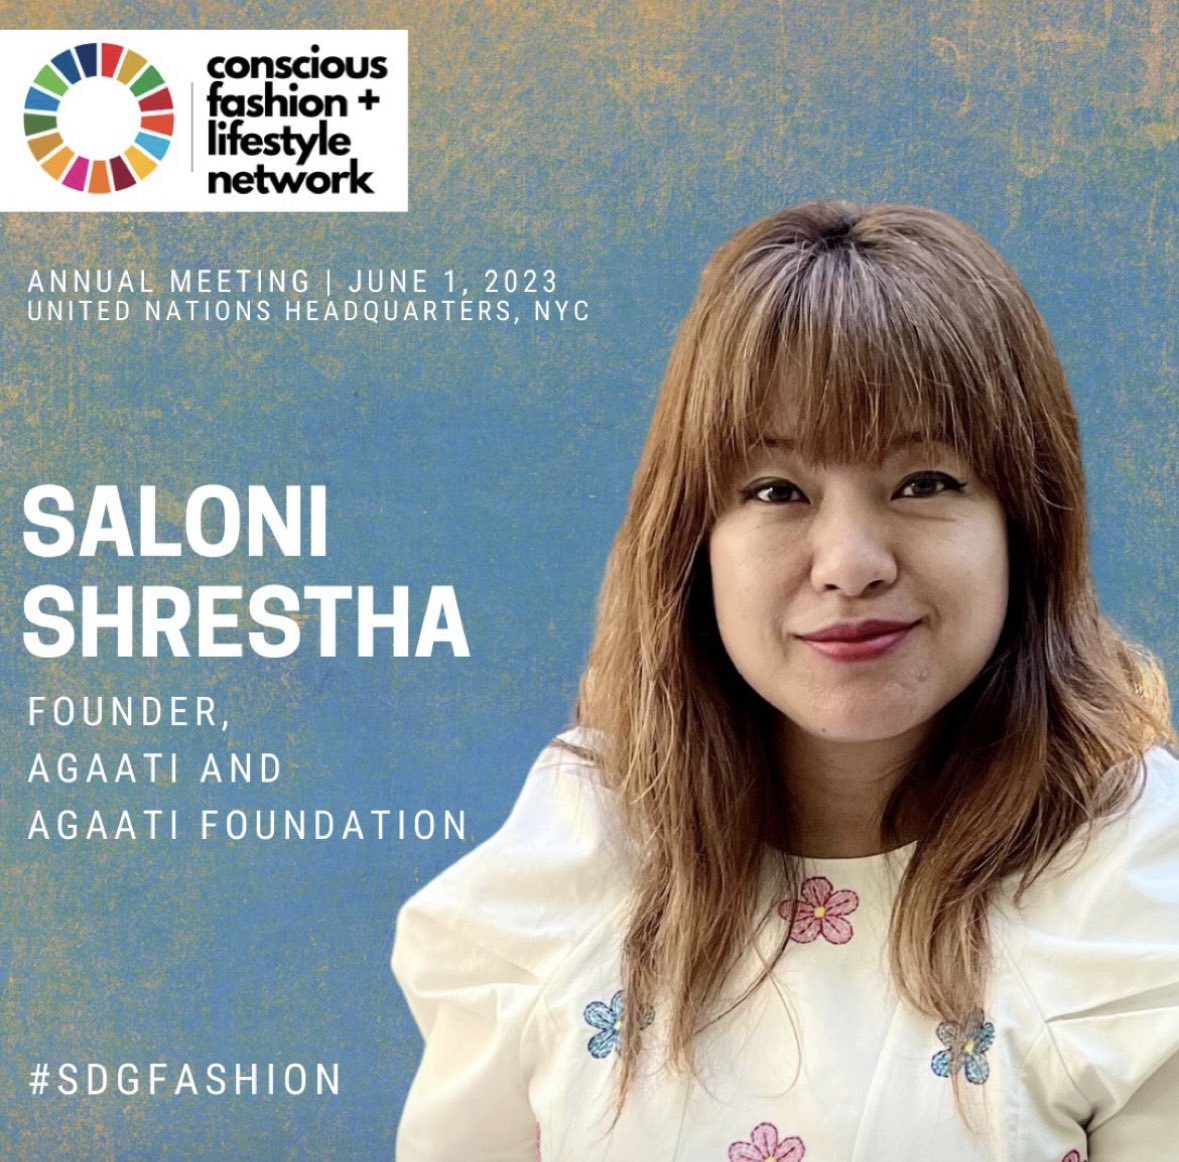 📢Pleased to announce that @SALONIRATHOR will be speaking at the United Nations Conscious Fashion and Lifestyle
Network Annual Meeting on June 1st at the United Nations Headquarters in NYC. Watch the meeting live
on UN Web TV #SDGFashion #CFLNetwork